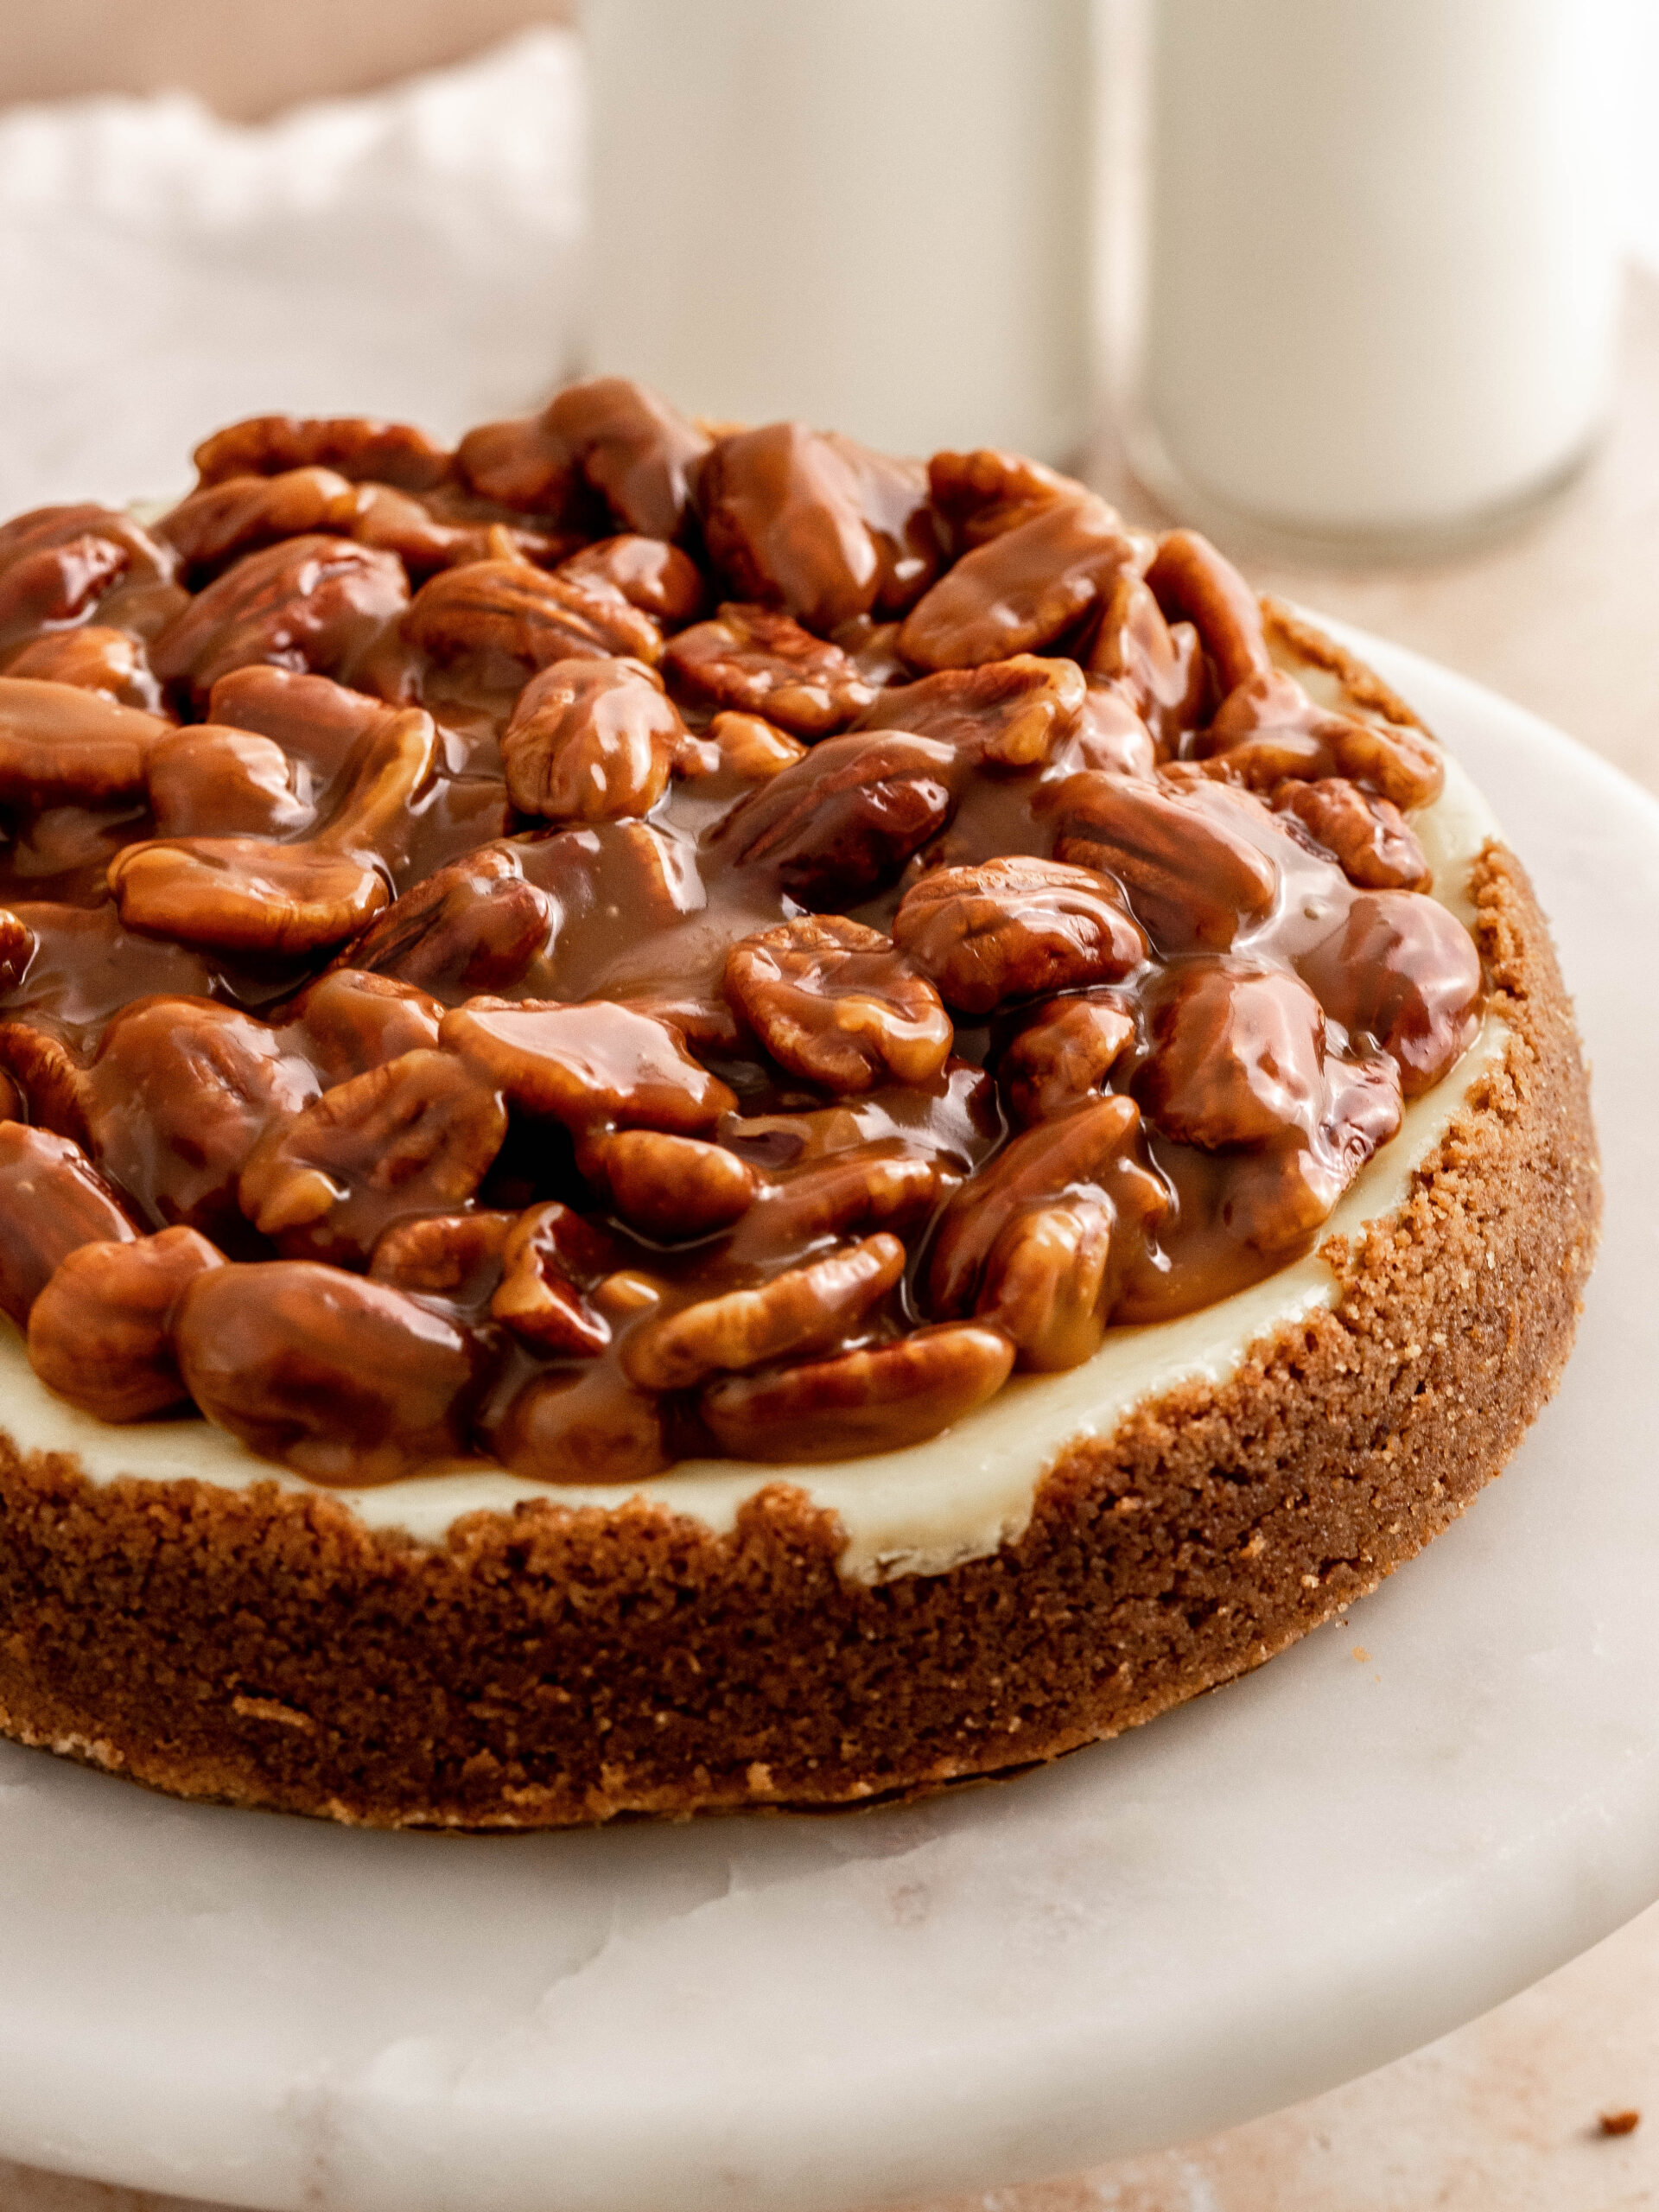 Step 8. Add the caramel and pecans on top of the cheesecake and enjoy.